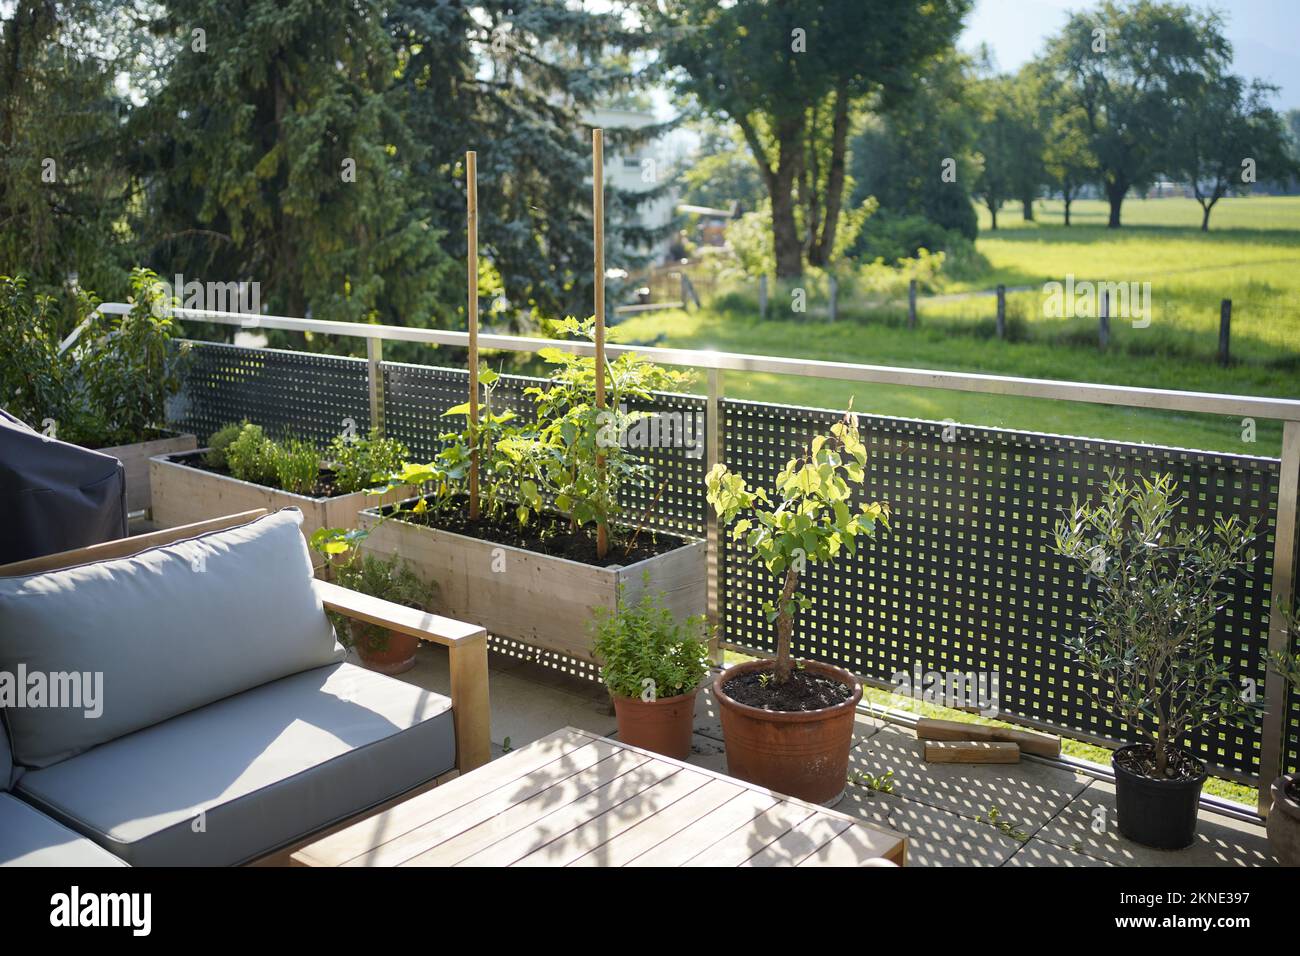 Magical morning light view of our balcony garden with a wooden lounge, potted plants and raised herbal and vegetable beds. Stock Photo